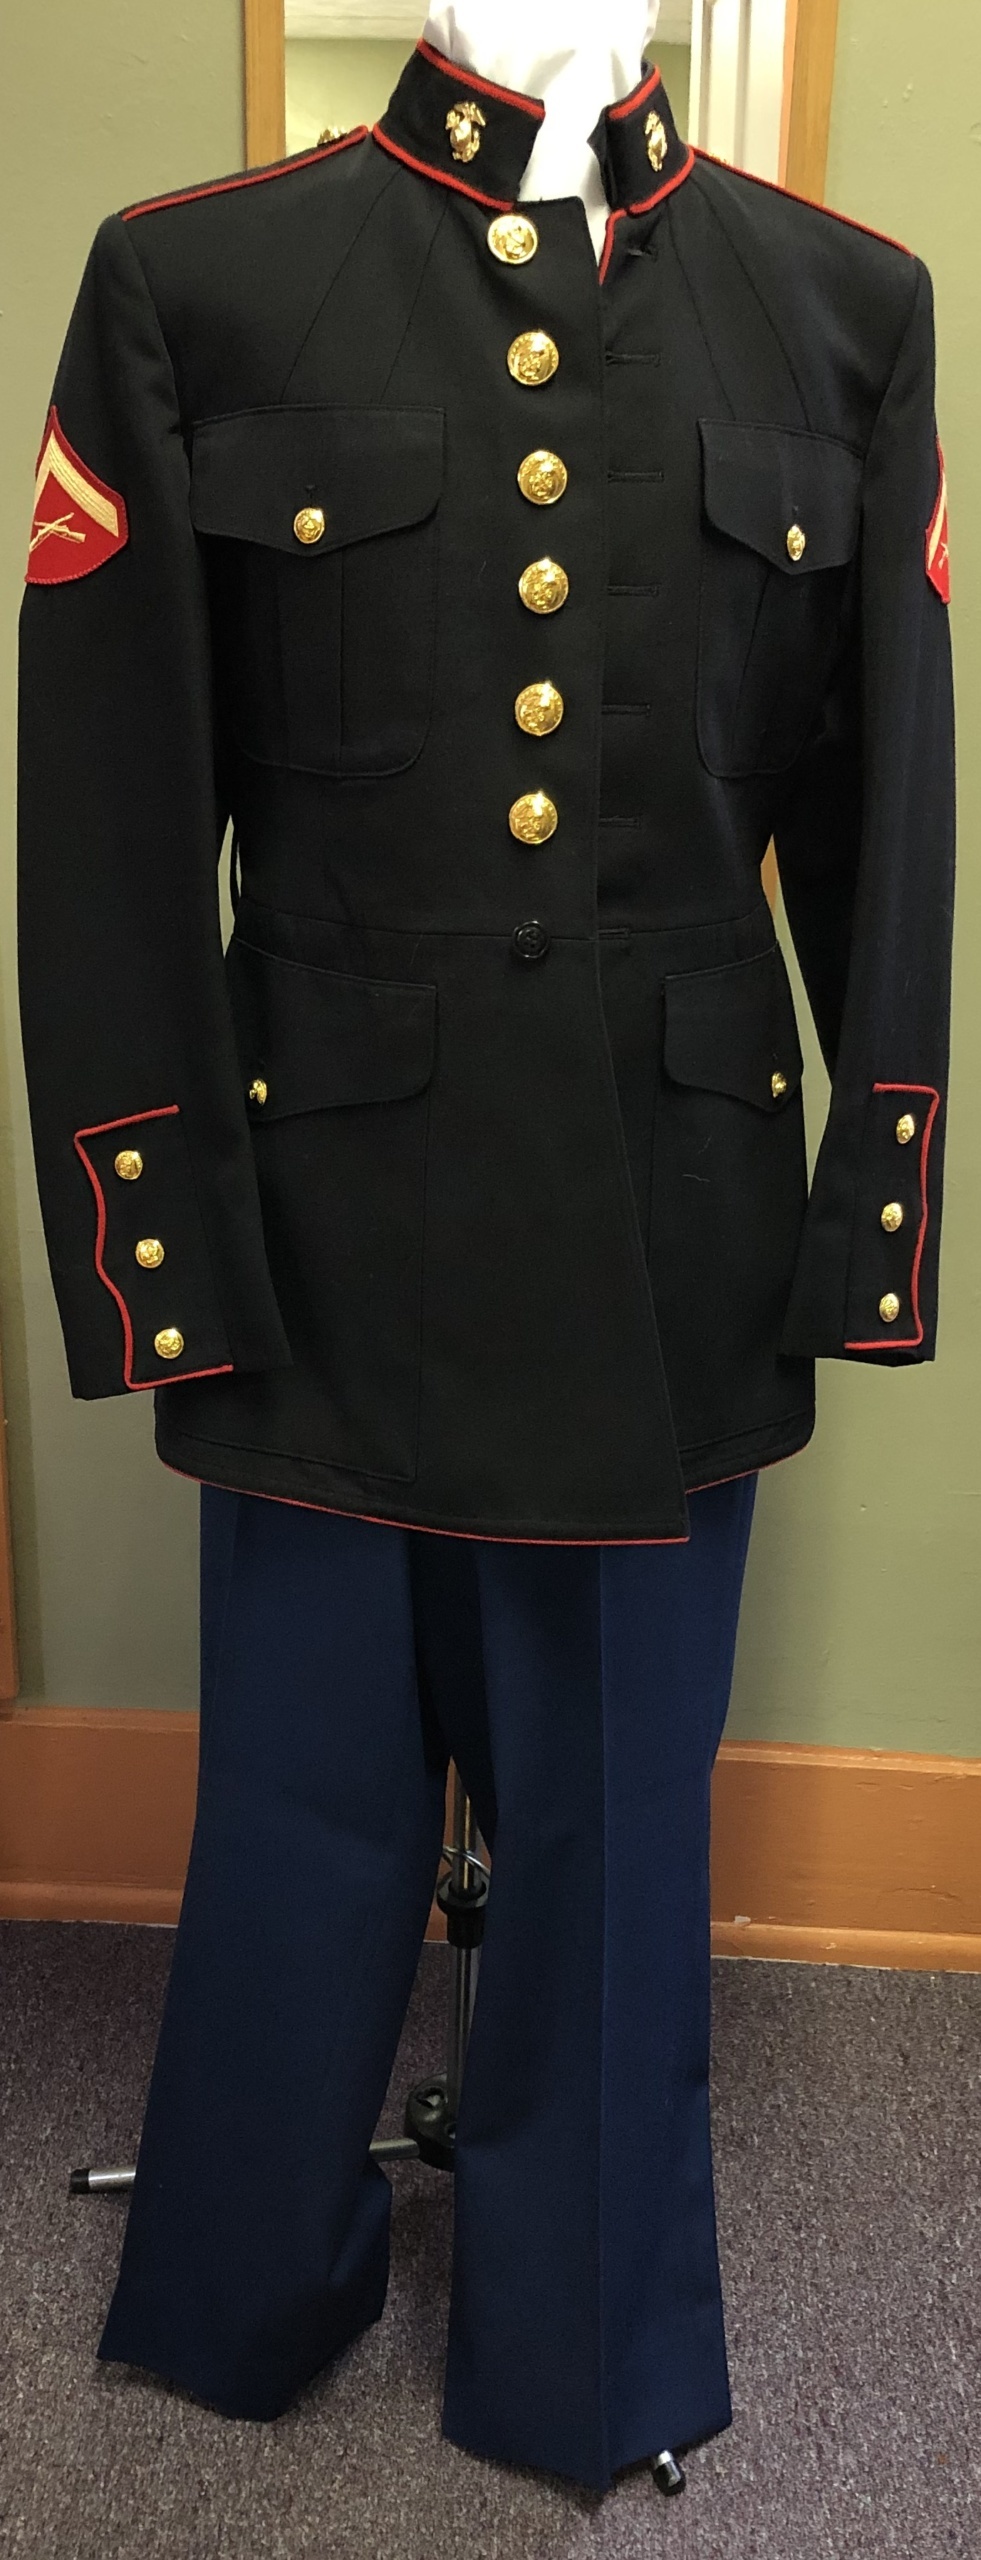 Black and Blue Military Uniform-MN ML 1101-Coat Chest 38